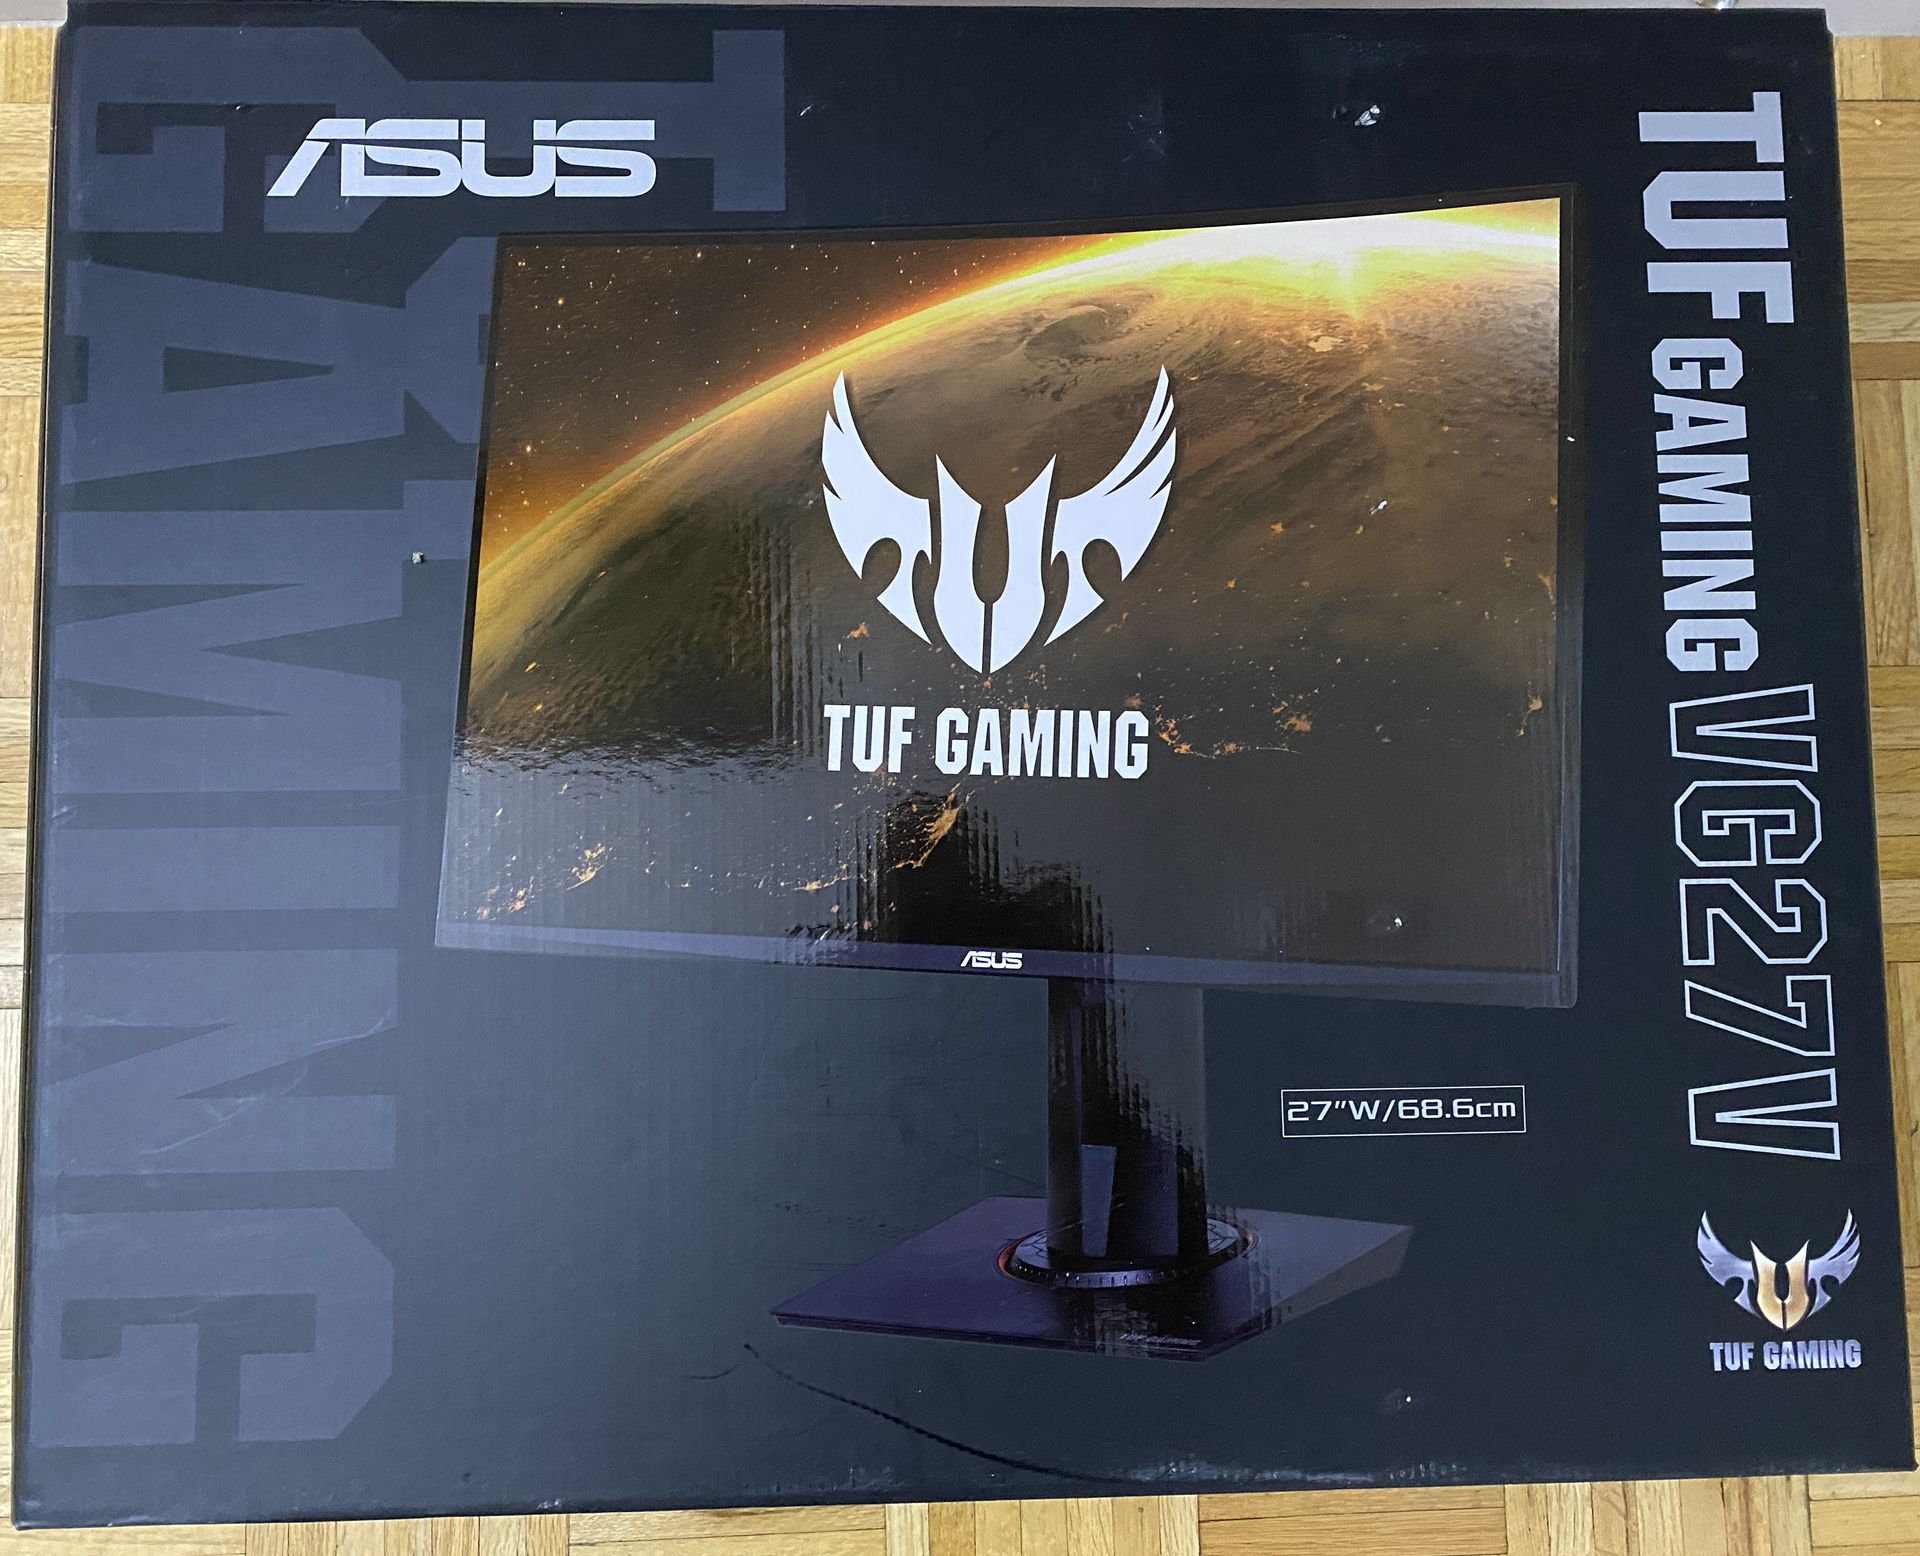 ASUS CURVED GAMING MONITOR 27 Inch